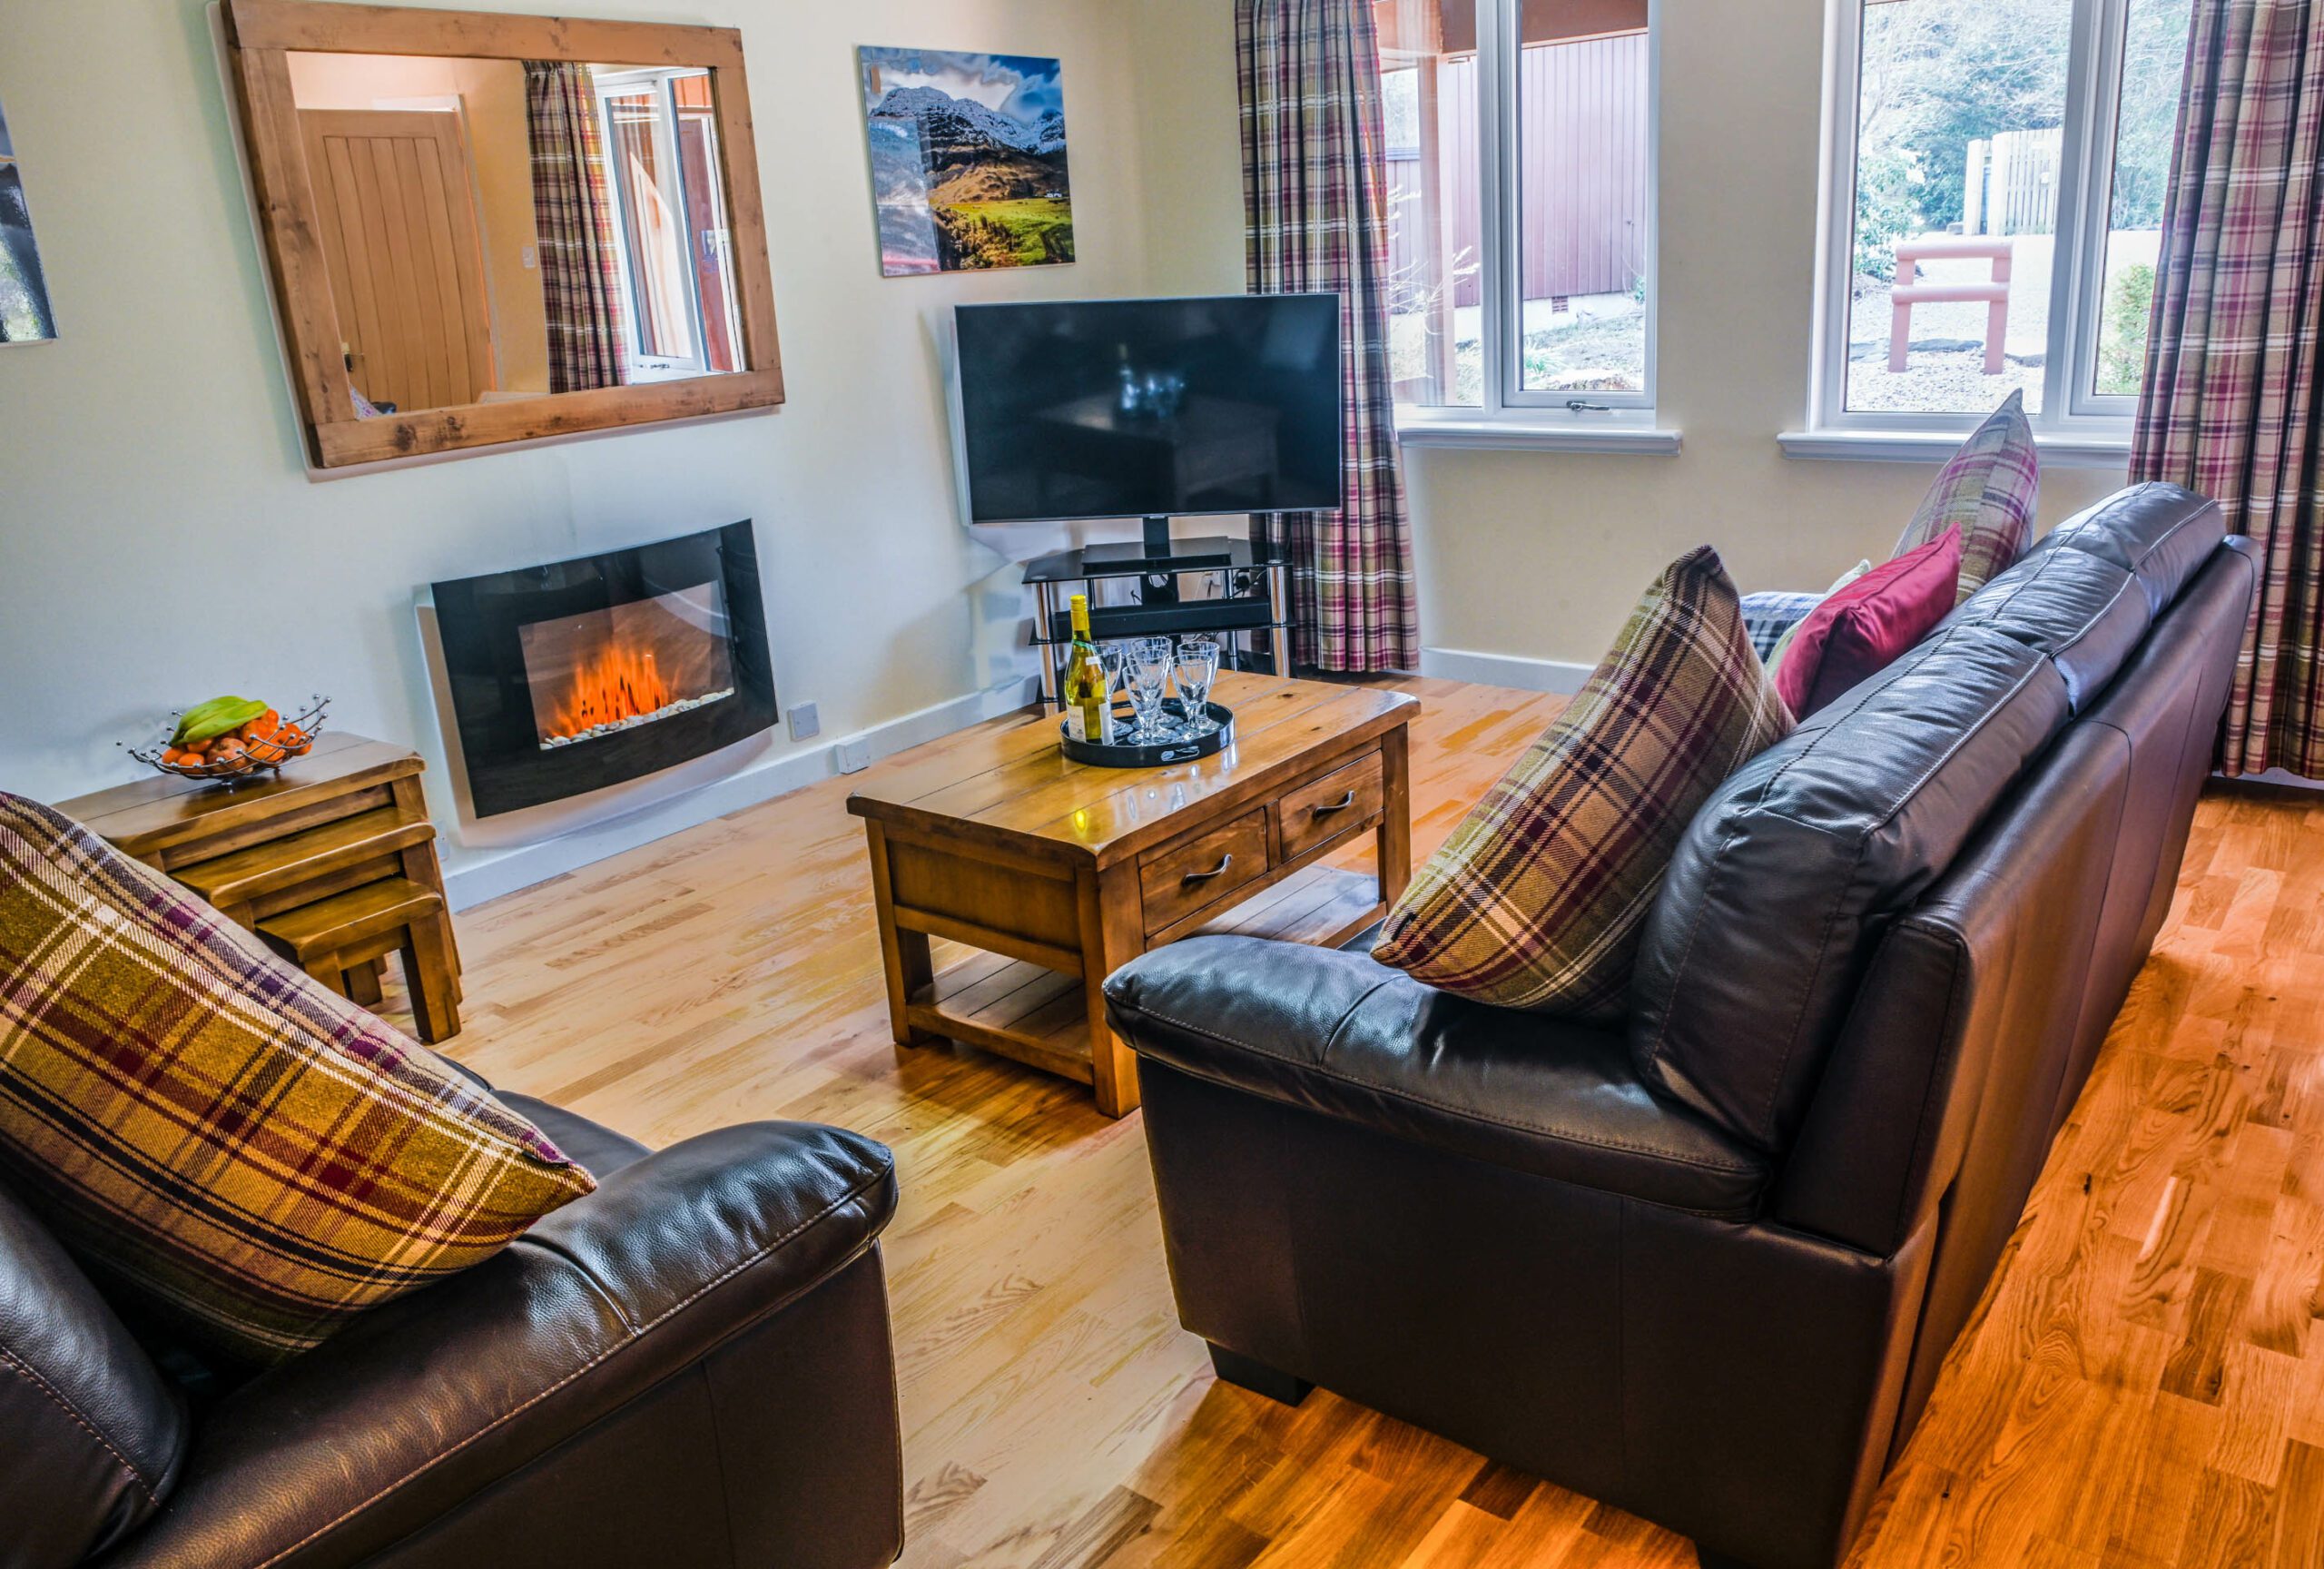 Spacious living area with Smart TV home cinema system at Birchbrae Highland Lodges, nr Glencoe & Fort William.